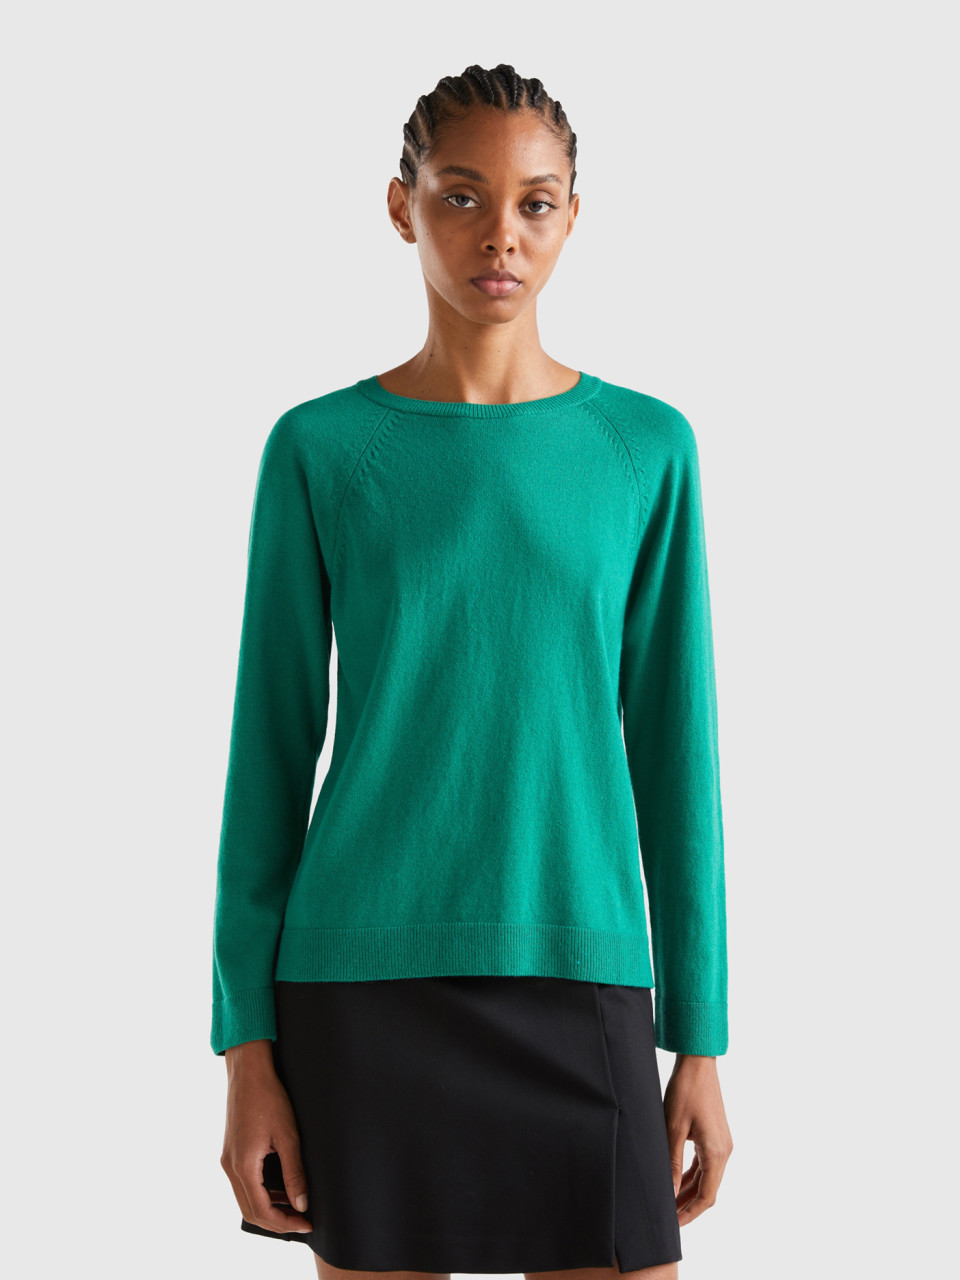 Benetton, Forest Green Crew Neck Sweater In Cashmere And Wool Blend, Green, Women